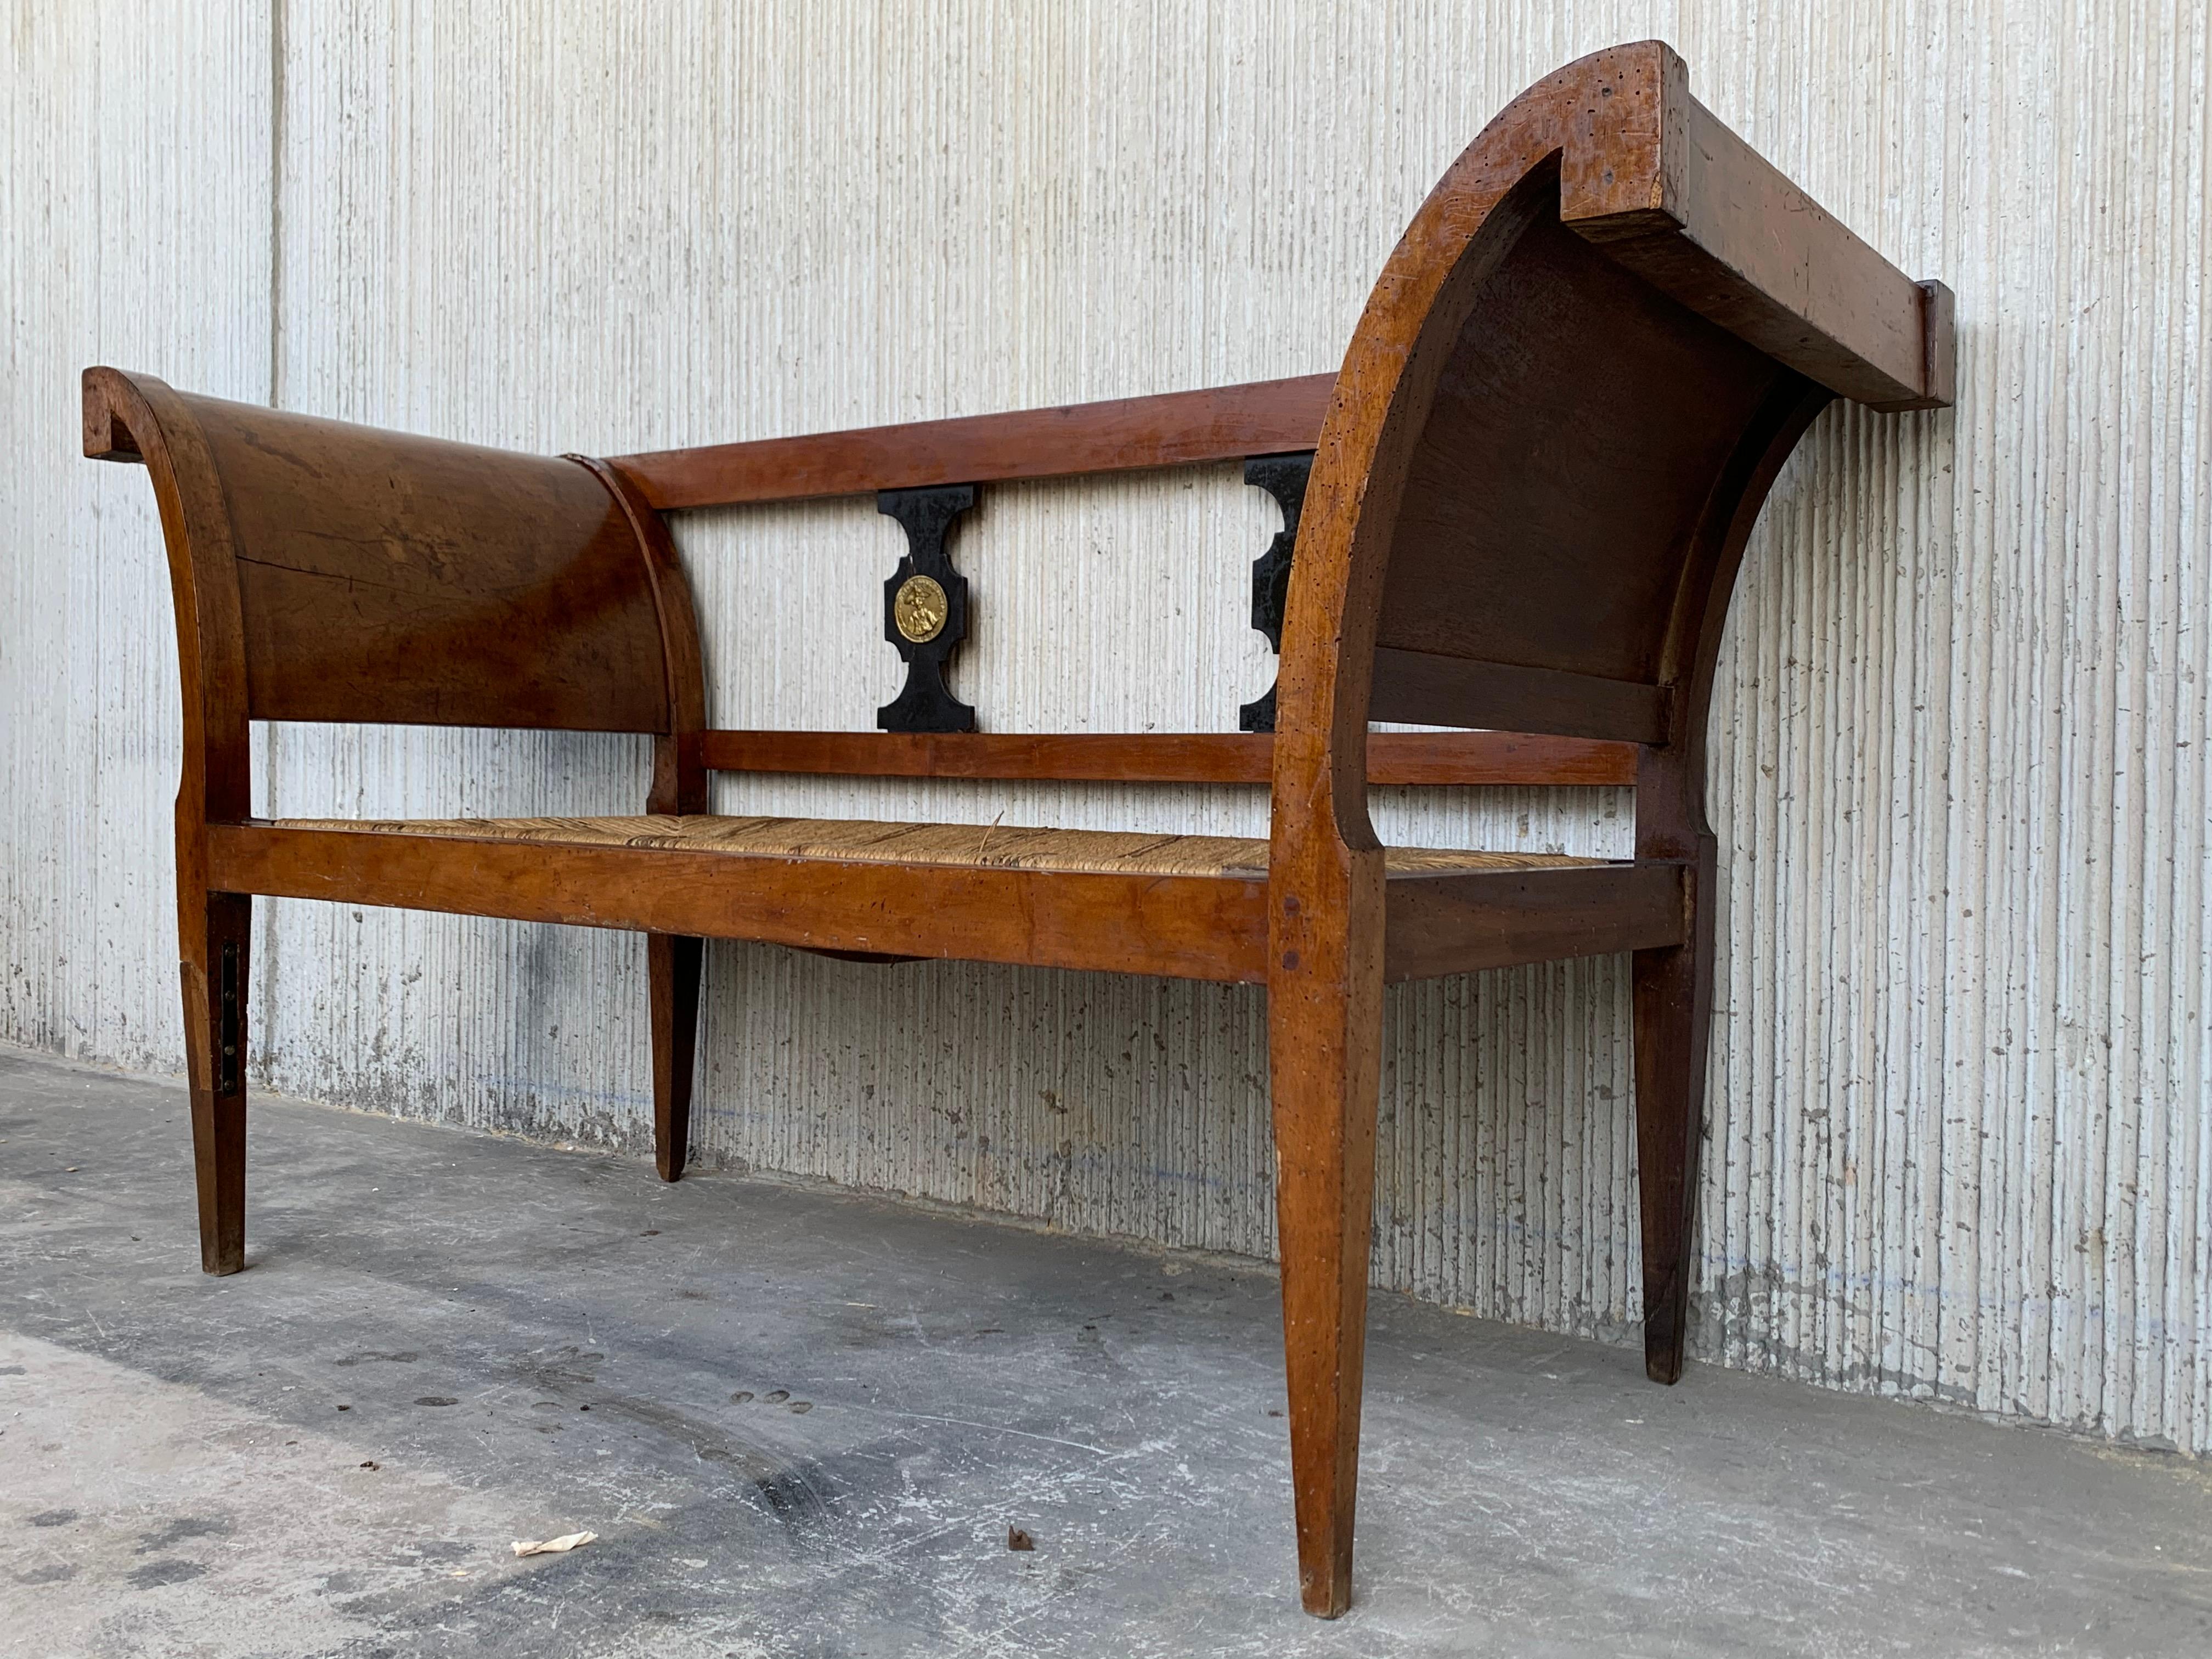 20th Century Empire Bench in Walnut with Ebonized Details and Caned Seat 3